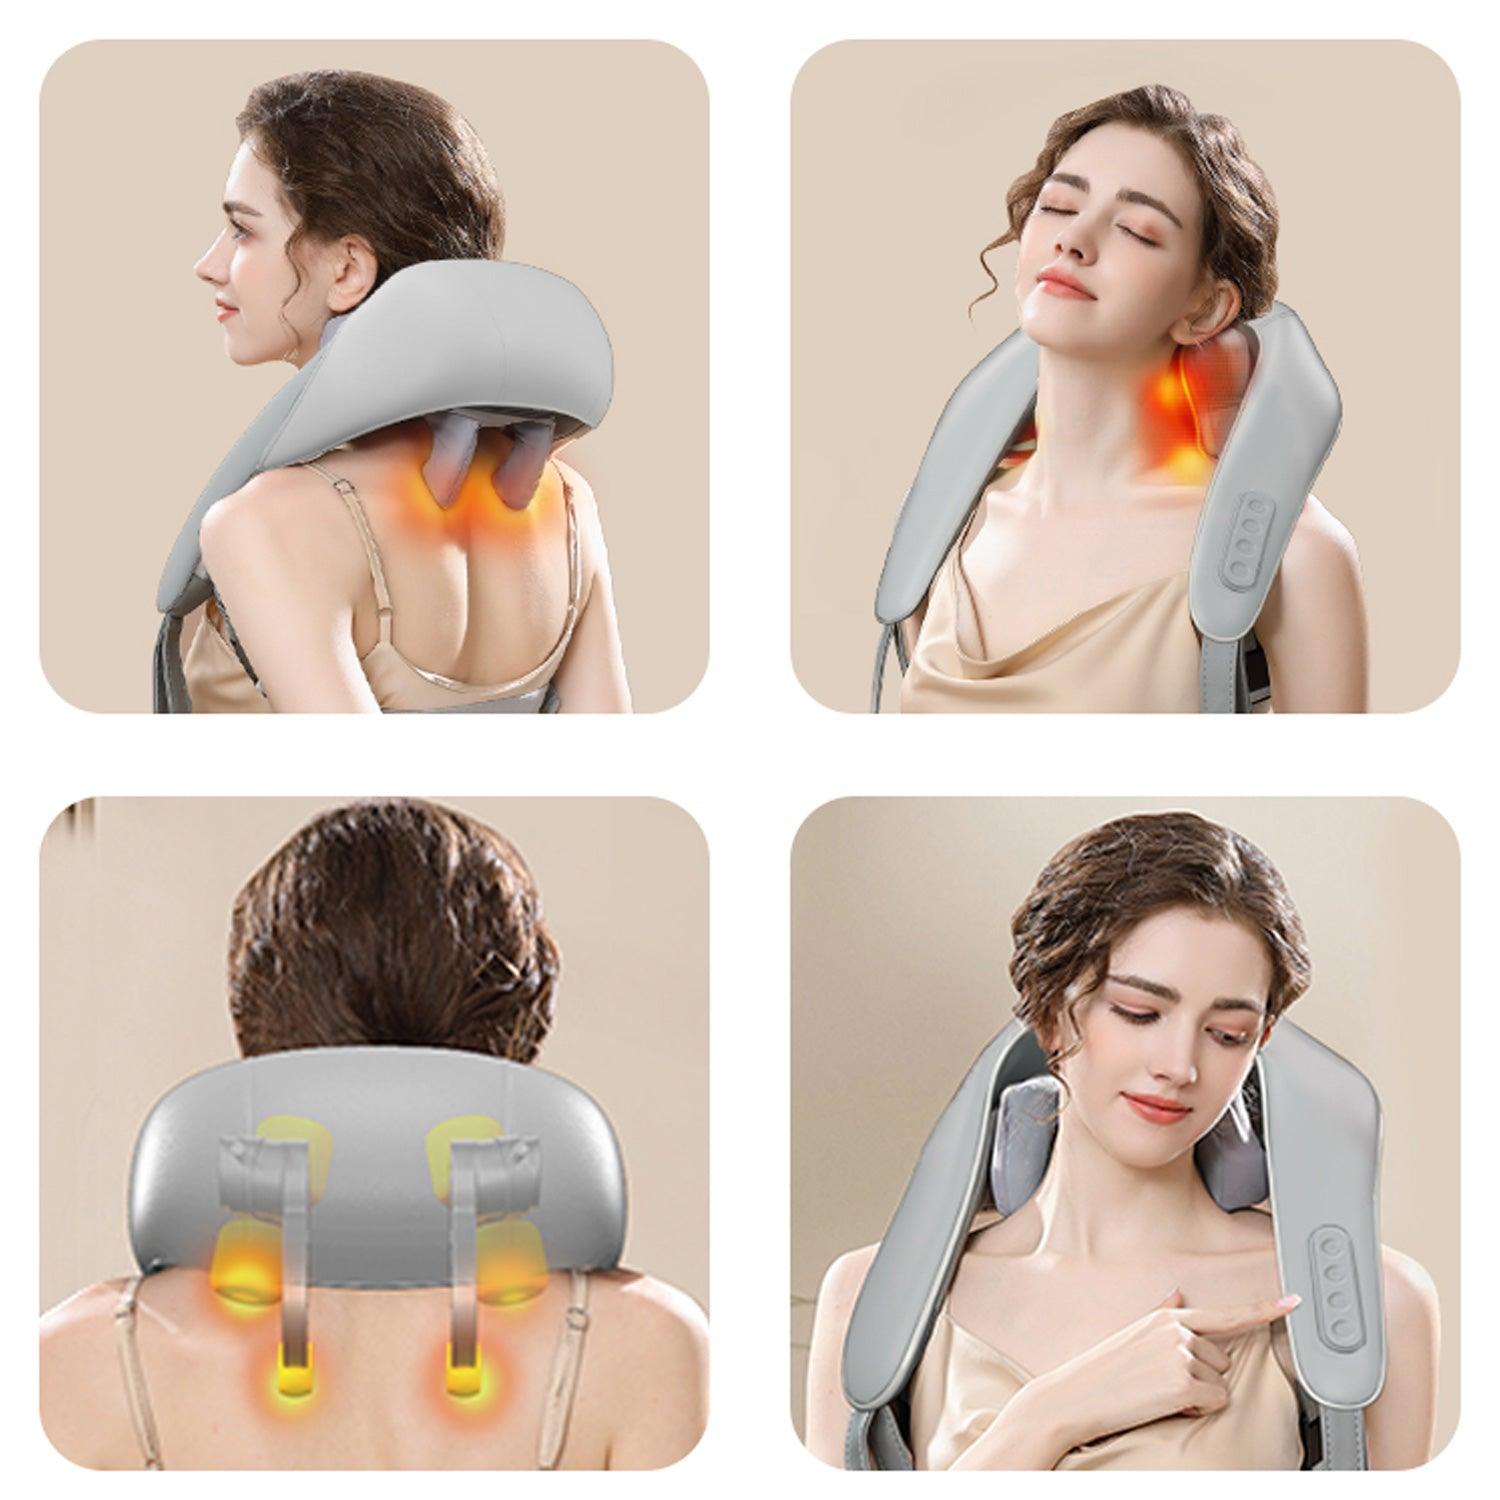 Neck Massager With Heat - Silvis21 ™